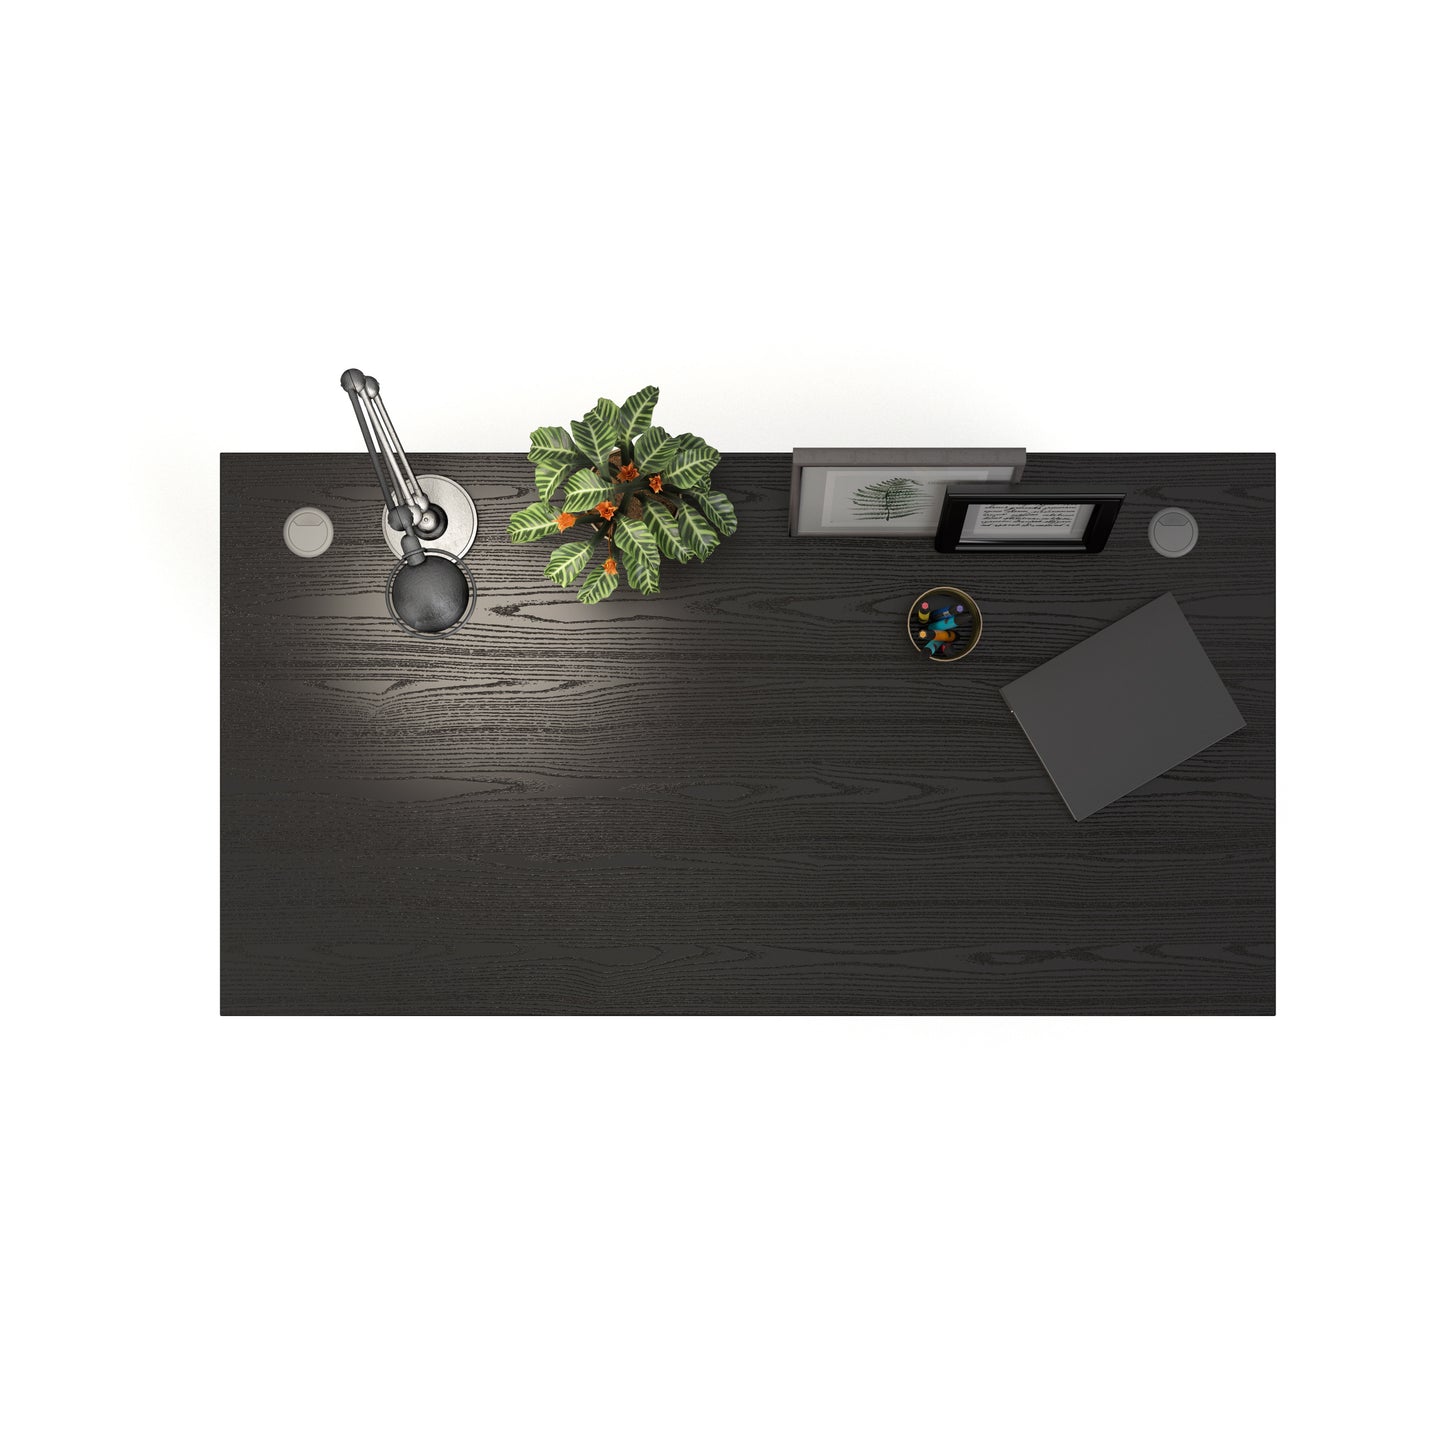 Prima  Desk 150 cm in Black woodgrain with Height adjustable legs with electric control in White